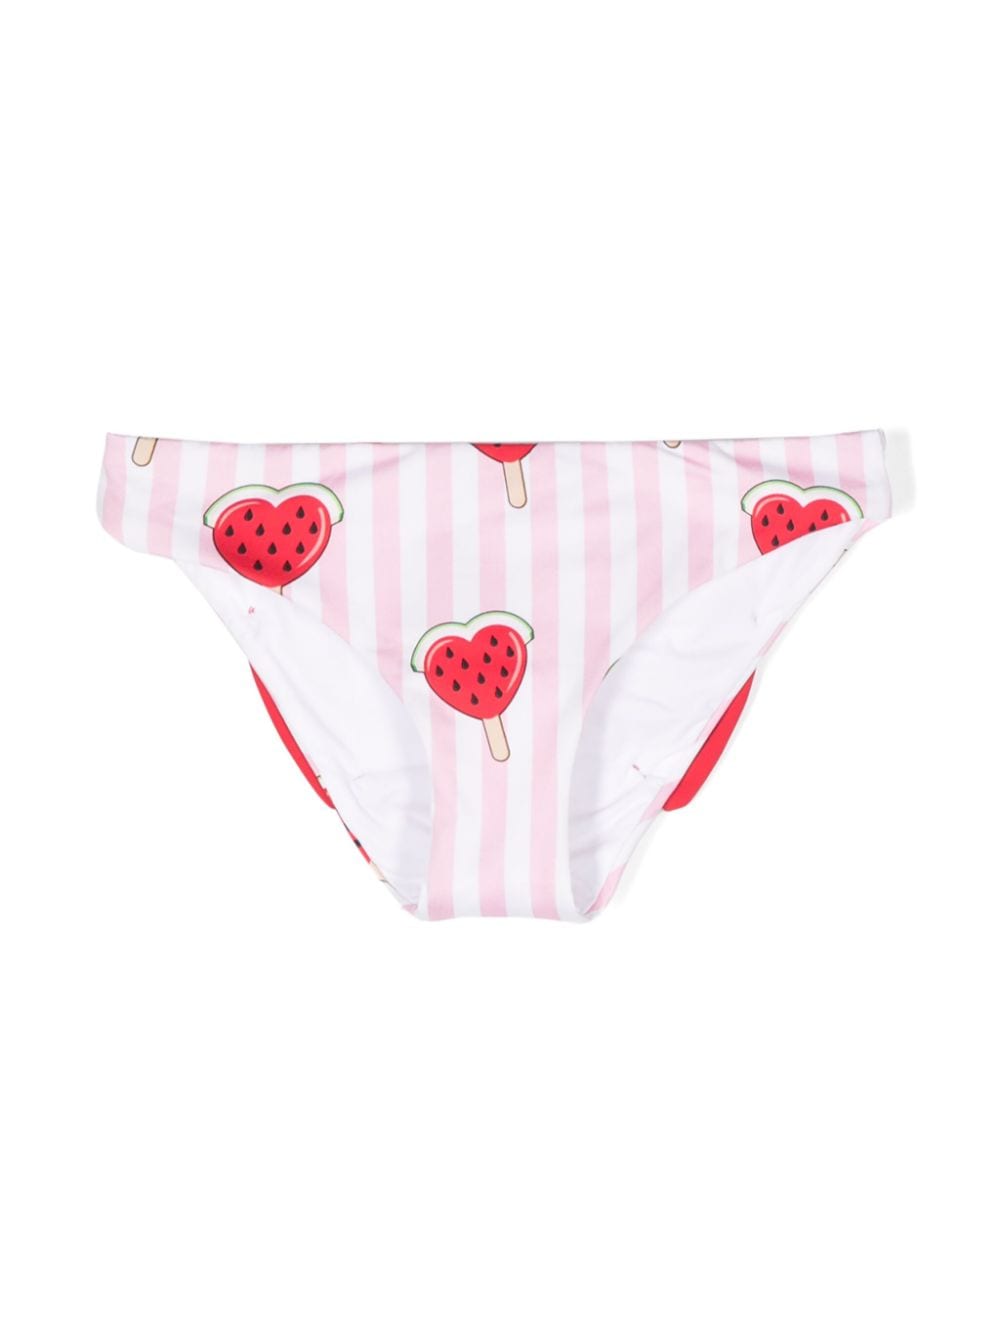 Pink briefs for girls with watermelon print